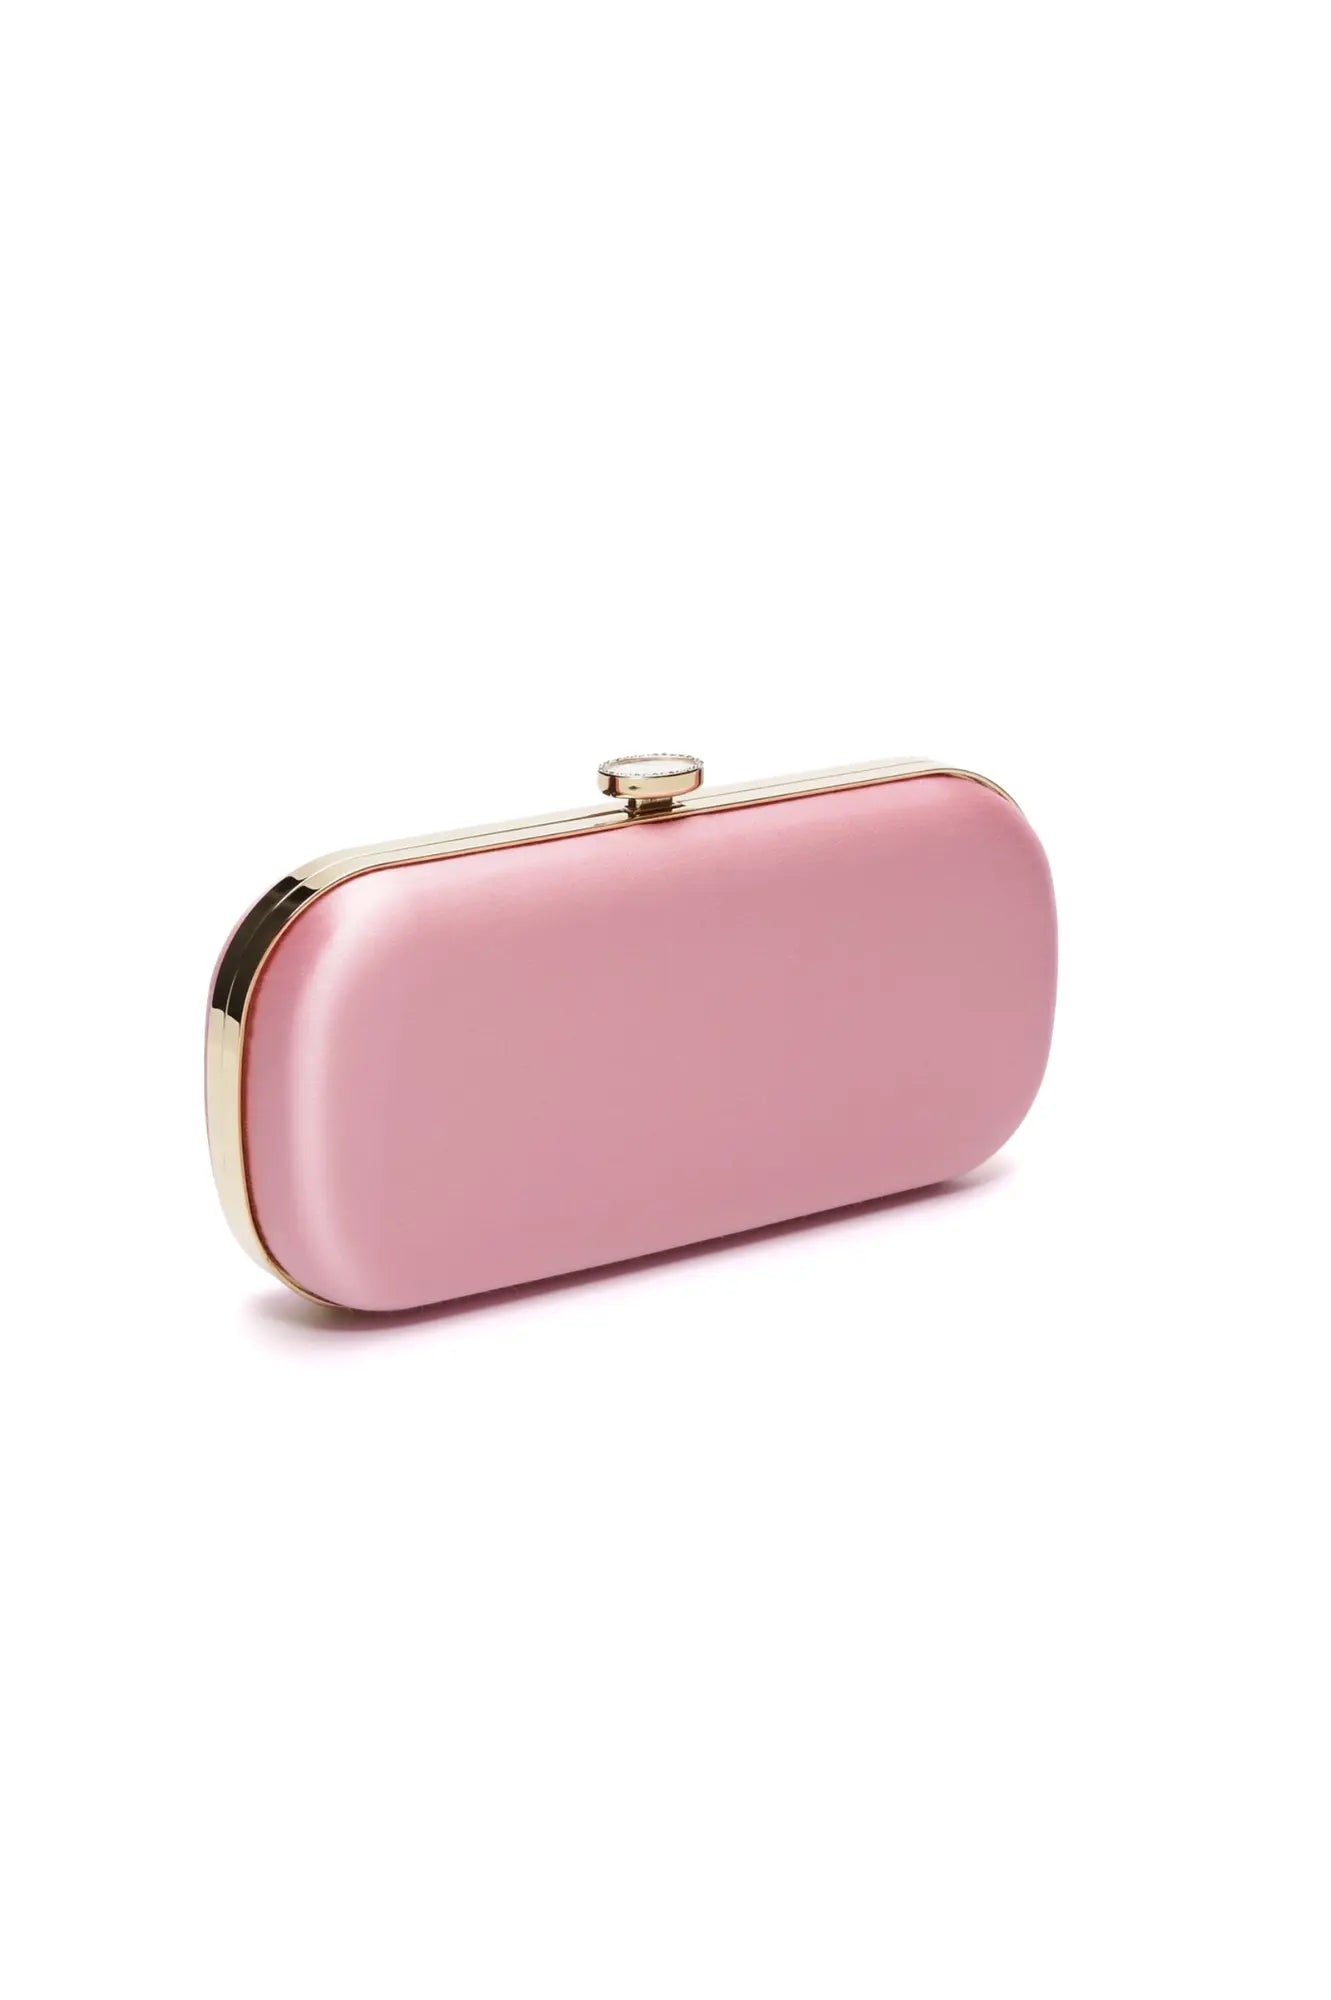 The Bella Rosa Collection&#39;s Bella Clutch Pink Grande with gold-tone hardware against a white background, perfected by Italian craftsmen.